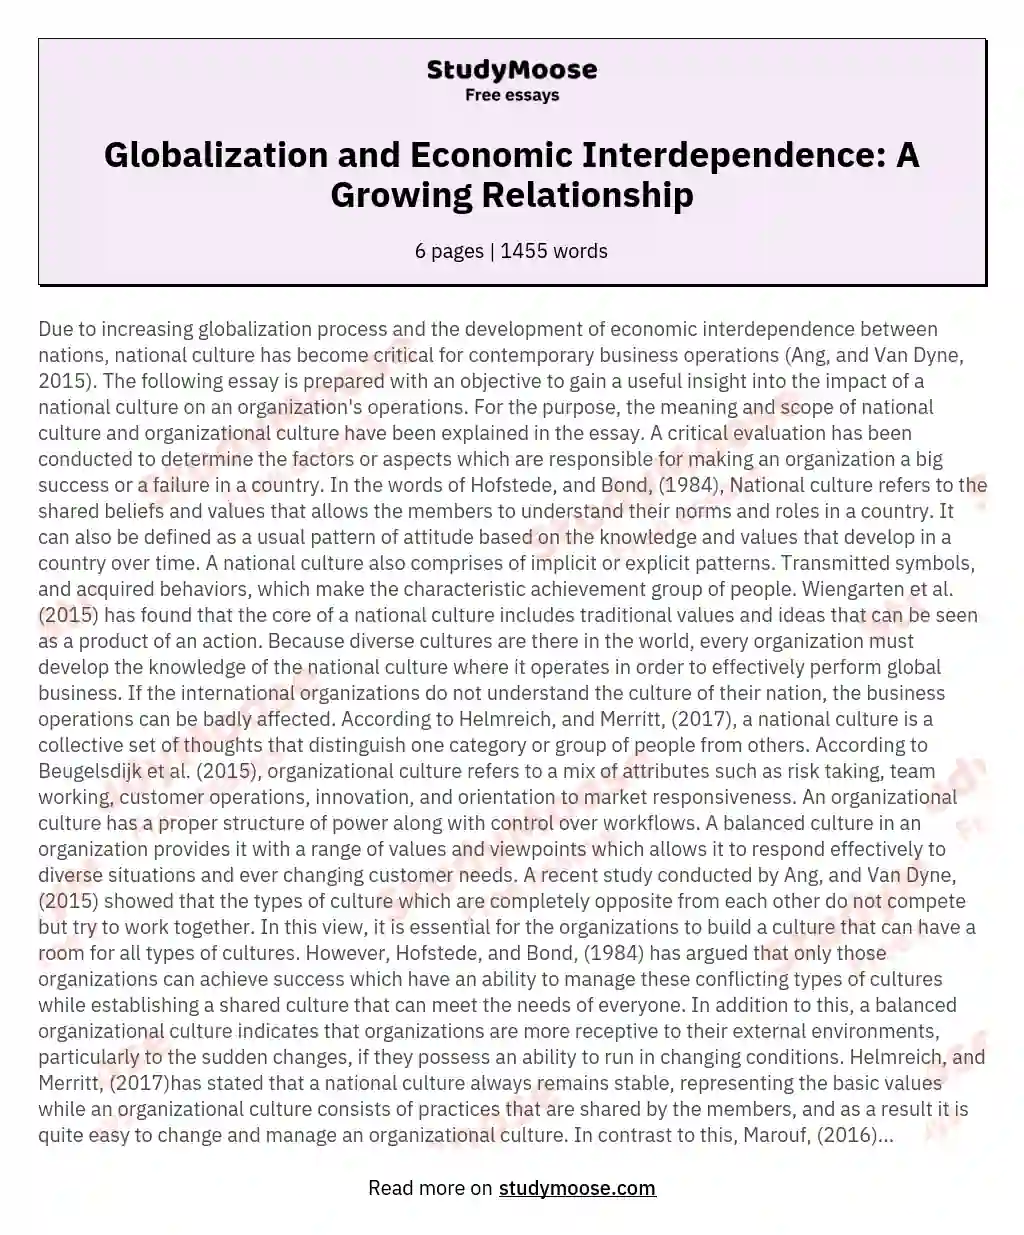 Globalization and Economic Interdependence: A Growing Relationship